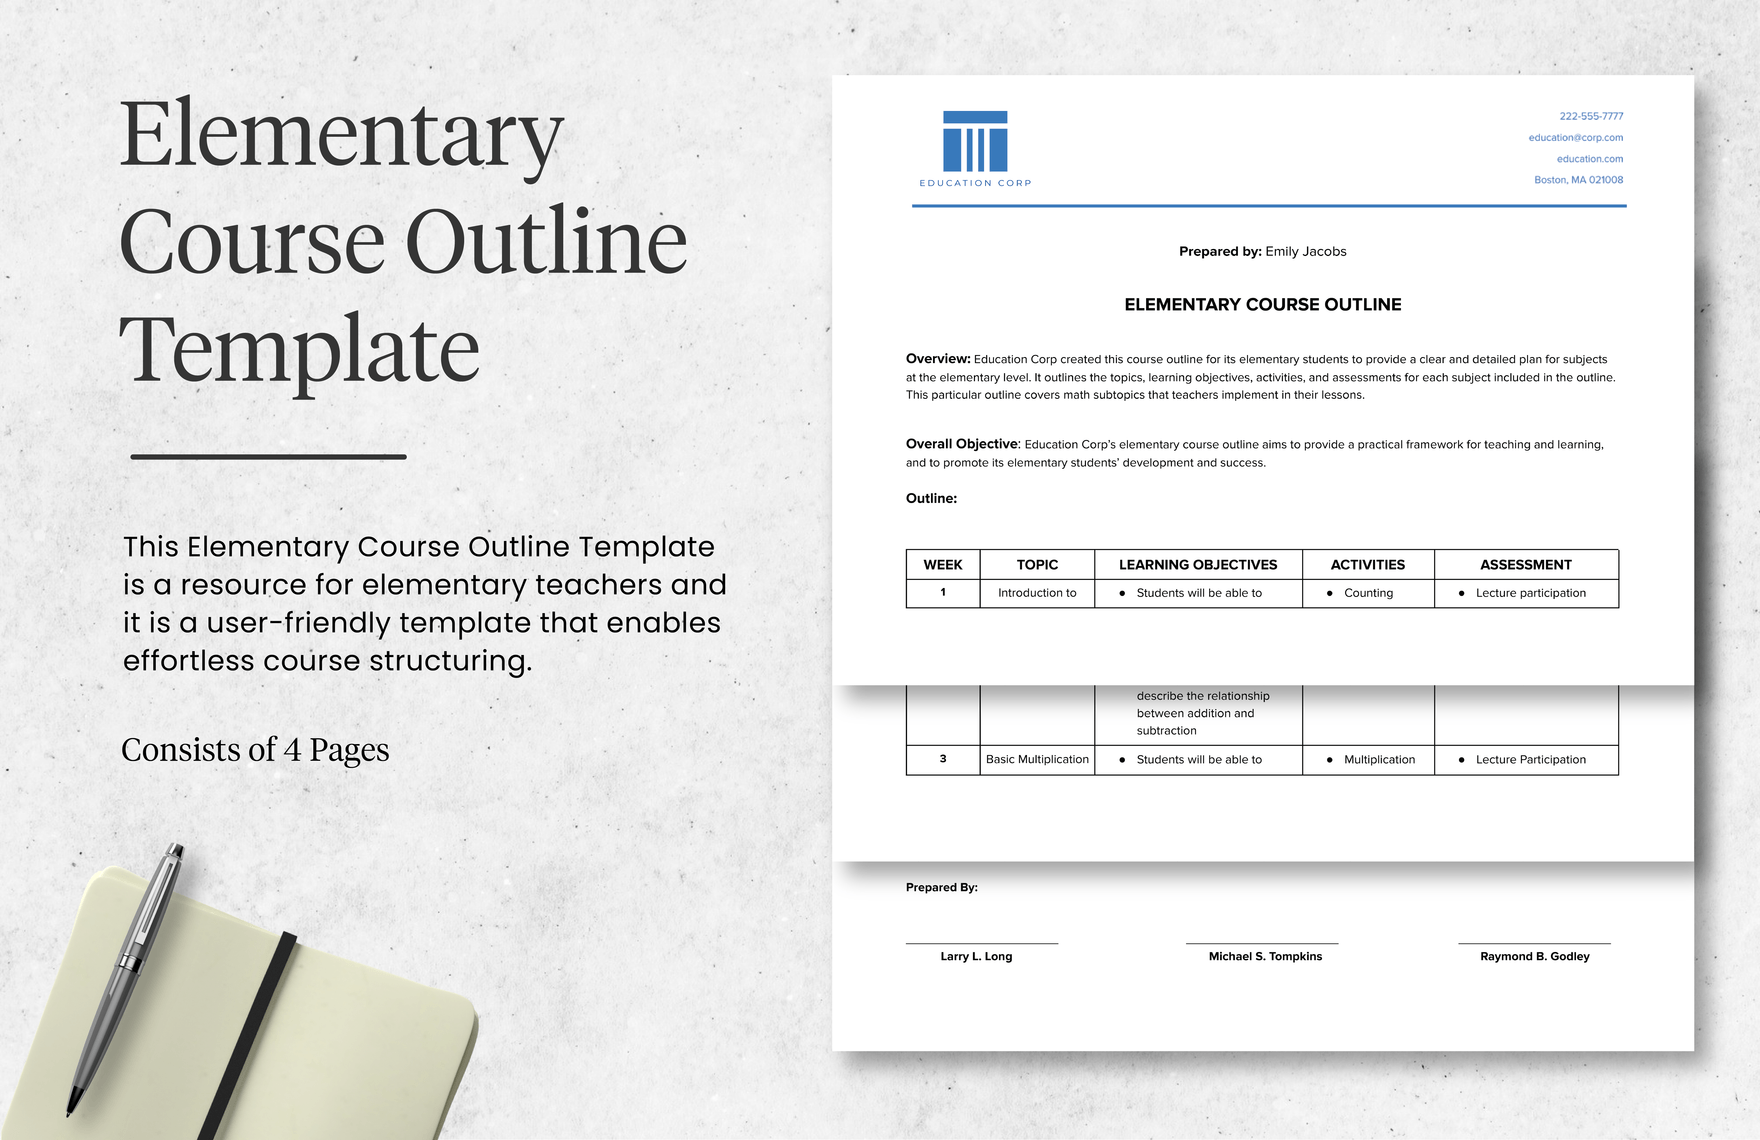 Elementary Course Outline Template in Word, Google Docs